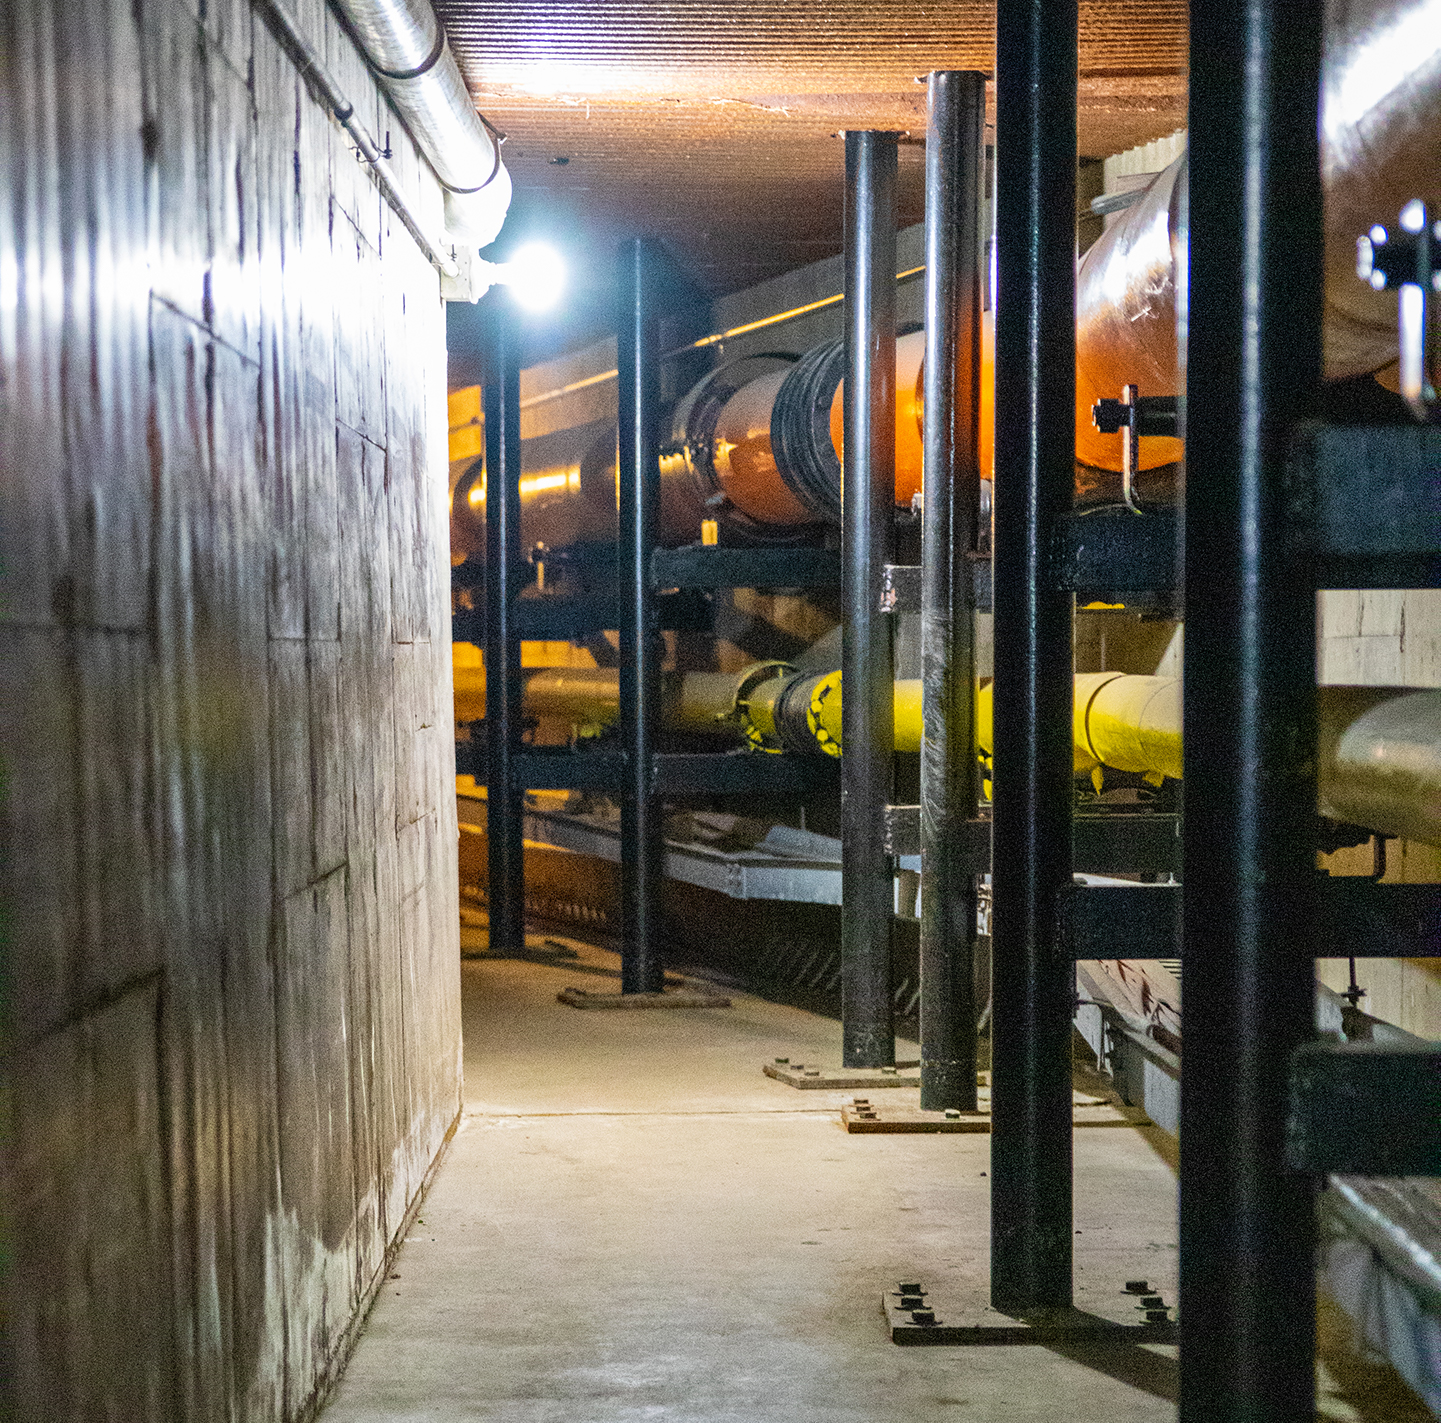 Underneath the U: The strange history behind USD’s tunnel system